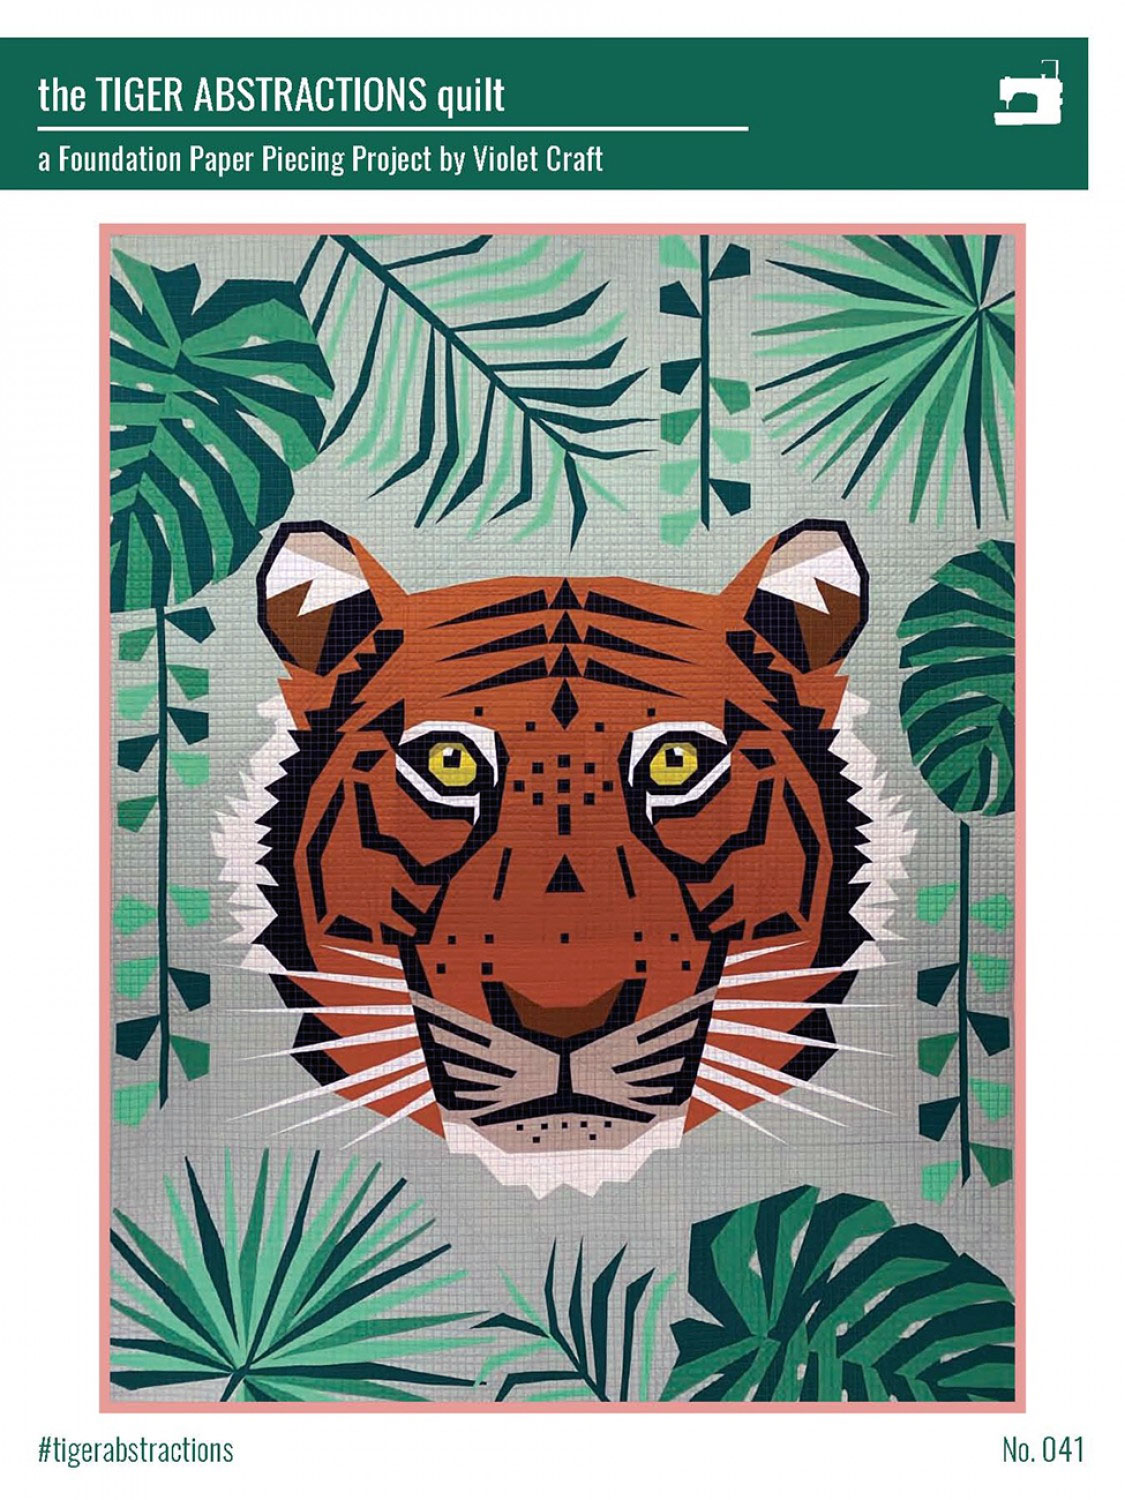 The-Tiger-Abstractions-quilt-sewing-pattern-Violet-Craft-front